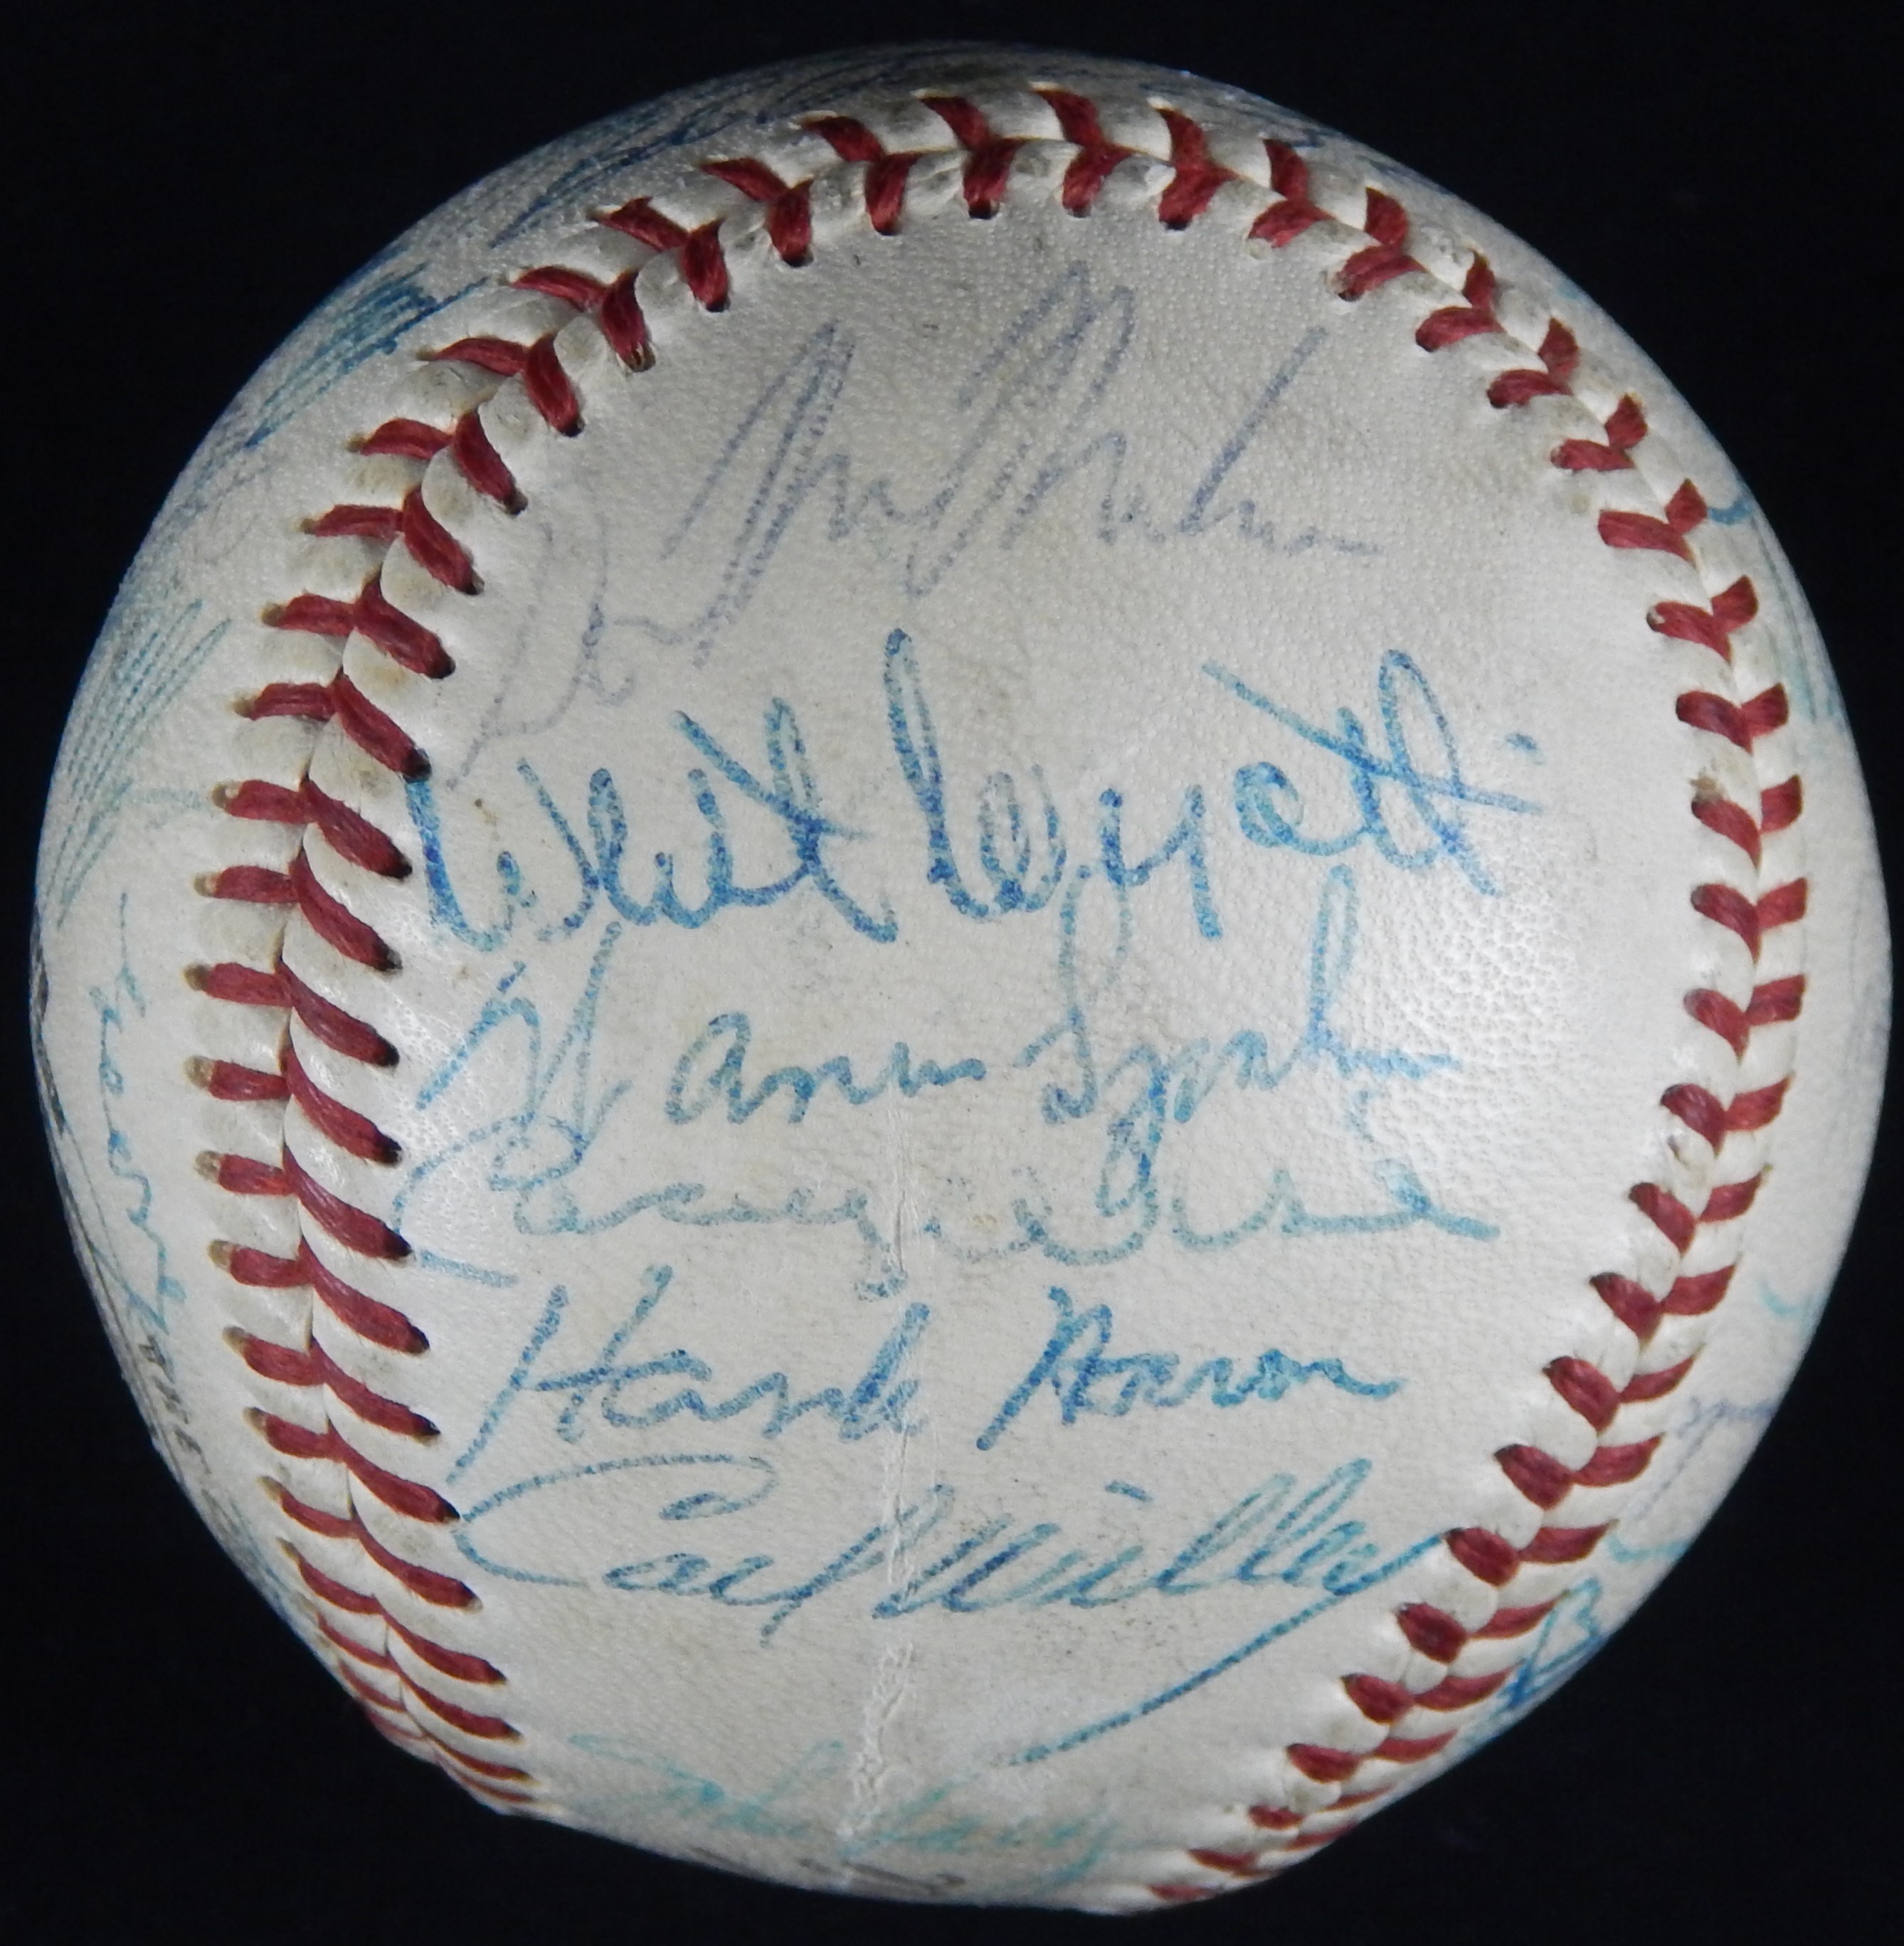 Best of the Best - 1958 Milwaukee Braves National League Champs Team Signed Baseball